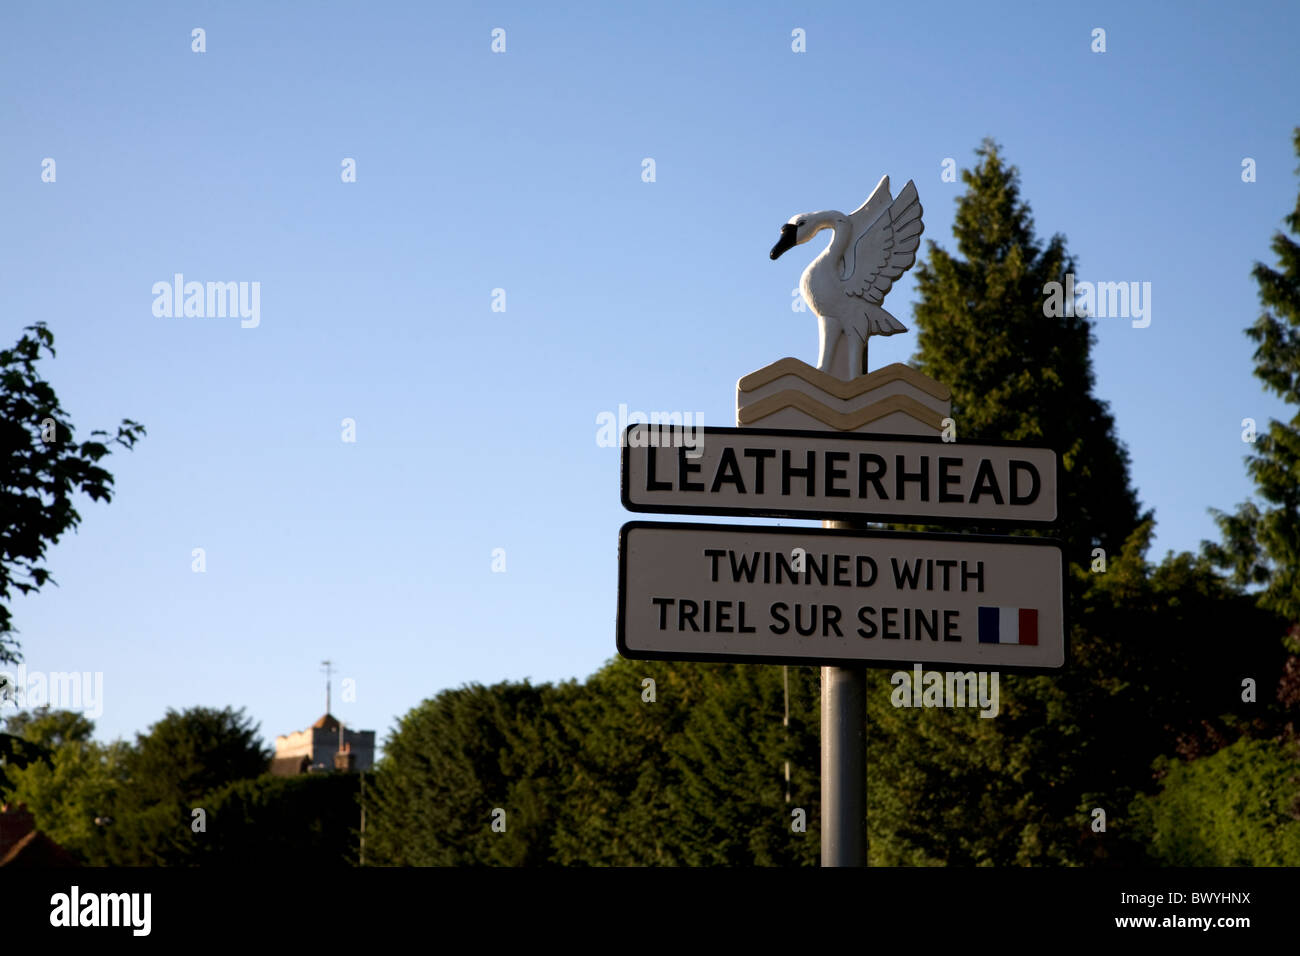 Town Sign & Twinned with Triel sur Seine Sign Leatherhead Surrey England Stock Photo